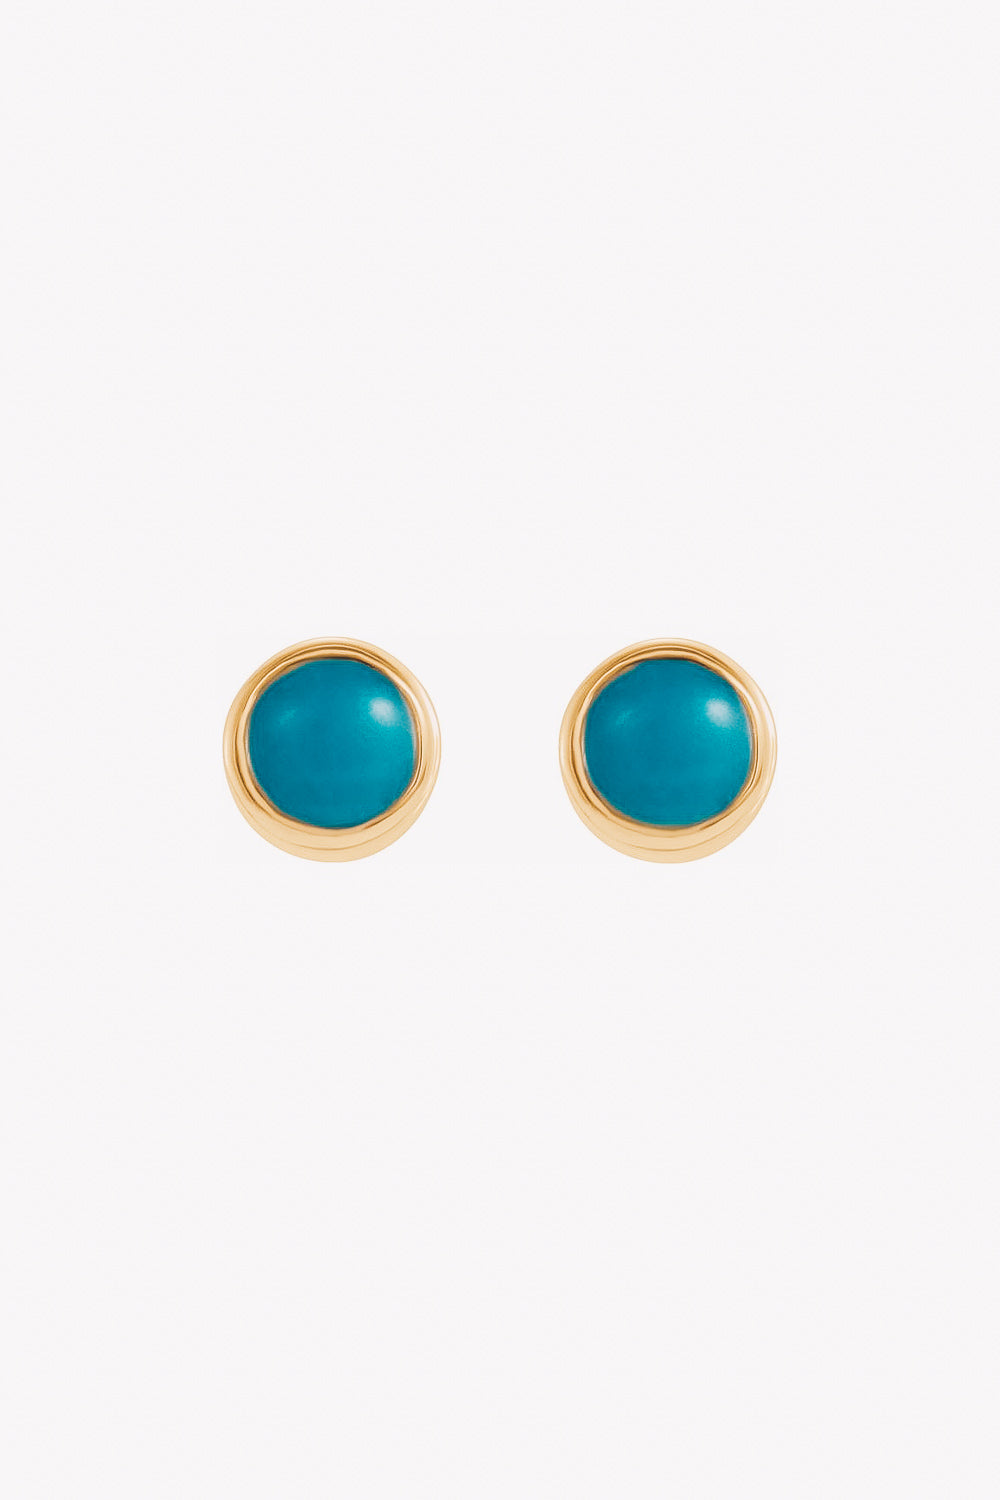 turquoise and gold bezel set stud earrings view from the front